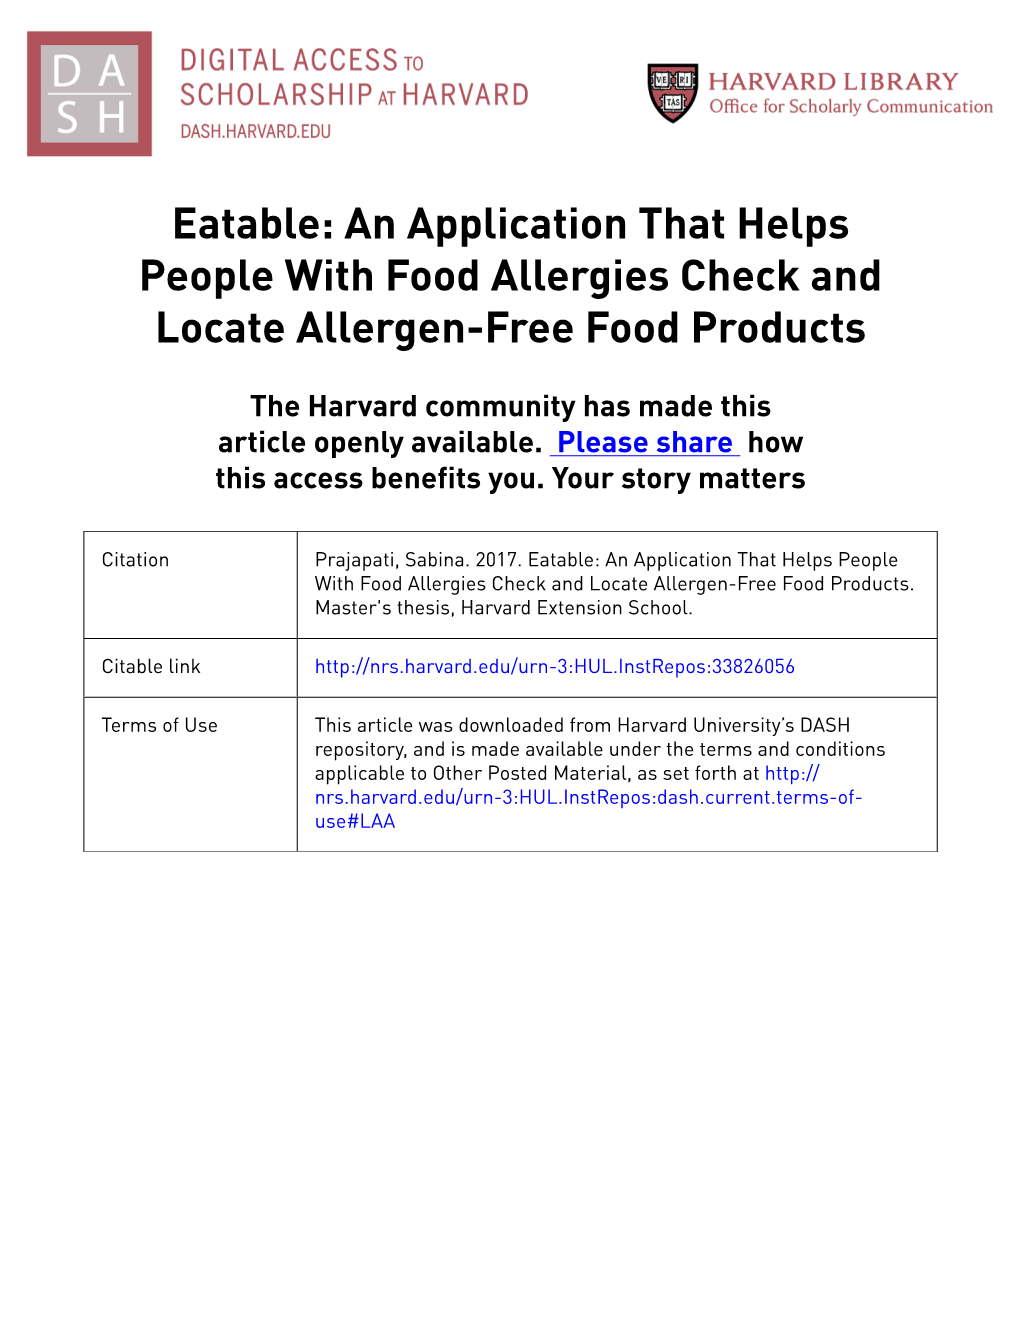 Eatable: an Application That Helps People with Food Allergies Check and Locate Allergen-Free Food Products